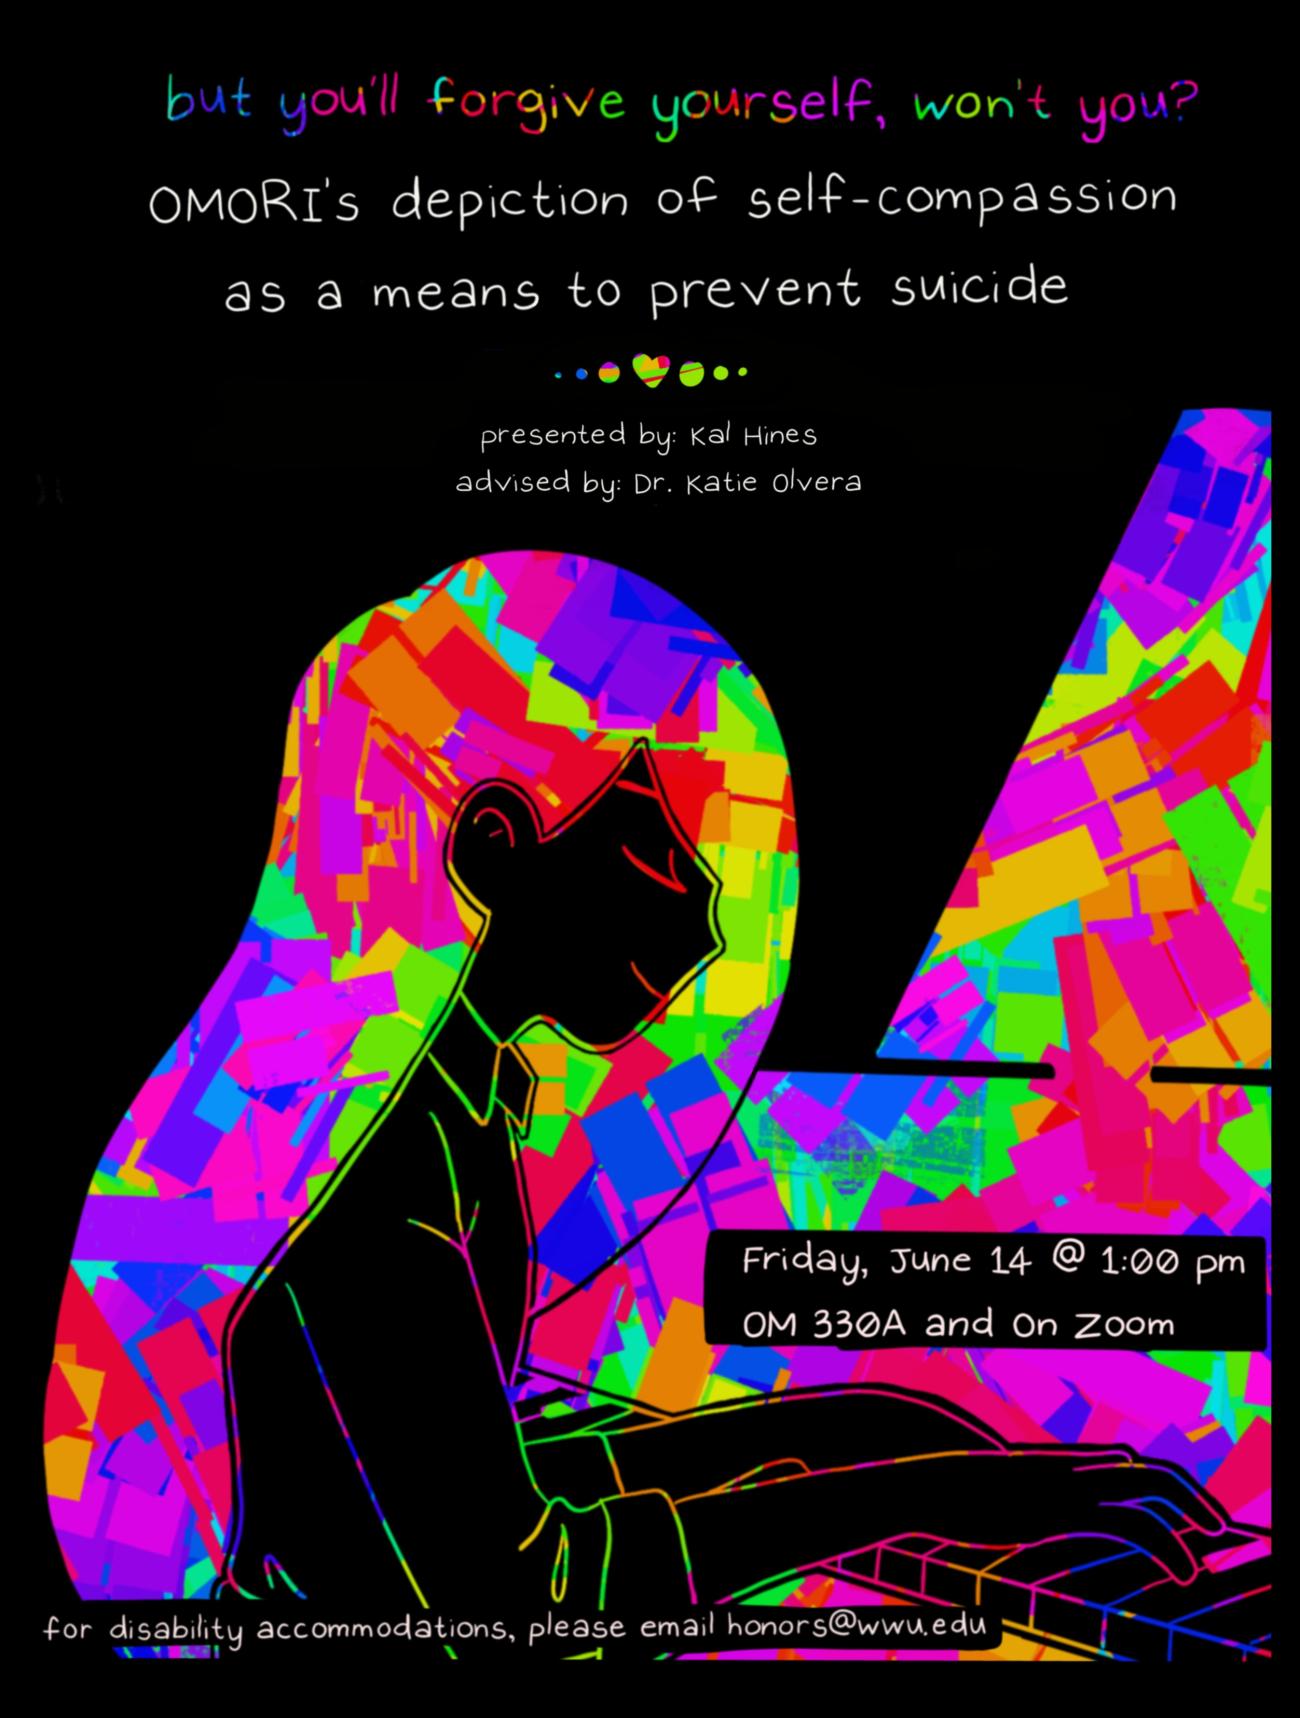 A black background with a colorful drawing of a girl playing the piano. Text reads "but you'll forgive yourself, won't you? OMORI's depiction of self-compassion as a means to prevent suicide. presented by: Kal Hines, advised by: Dr. Katie Olvera. Friday, June 14 @ 1:00 pm, OM 330A and On Zoom. for disability accommodations, please email honors@wwu.edu"